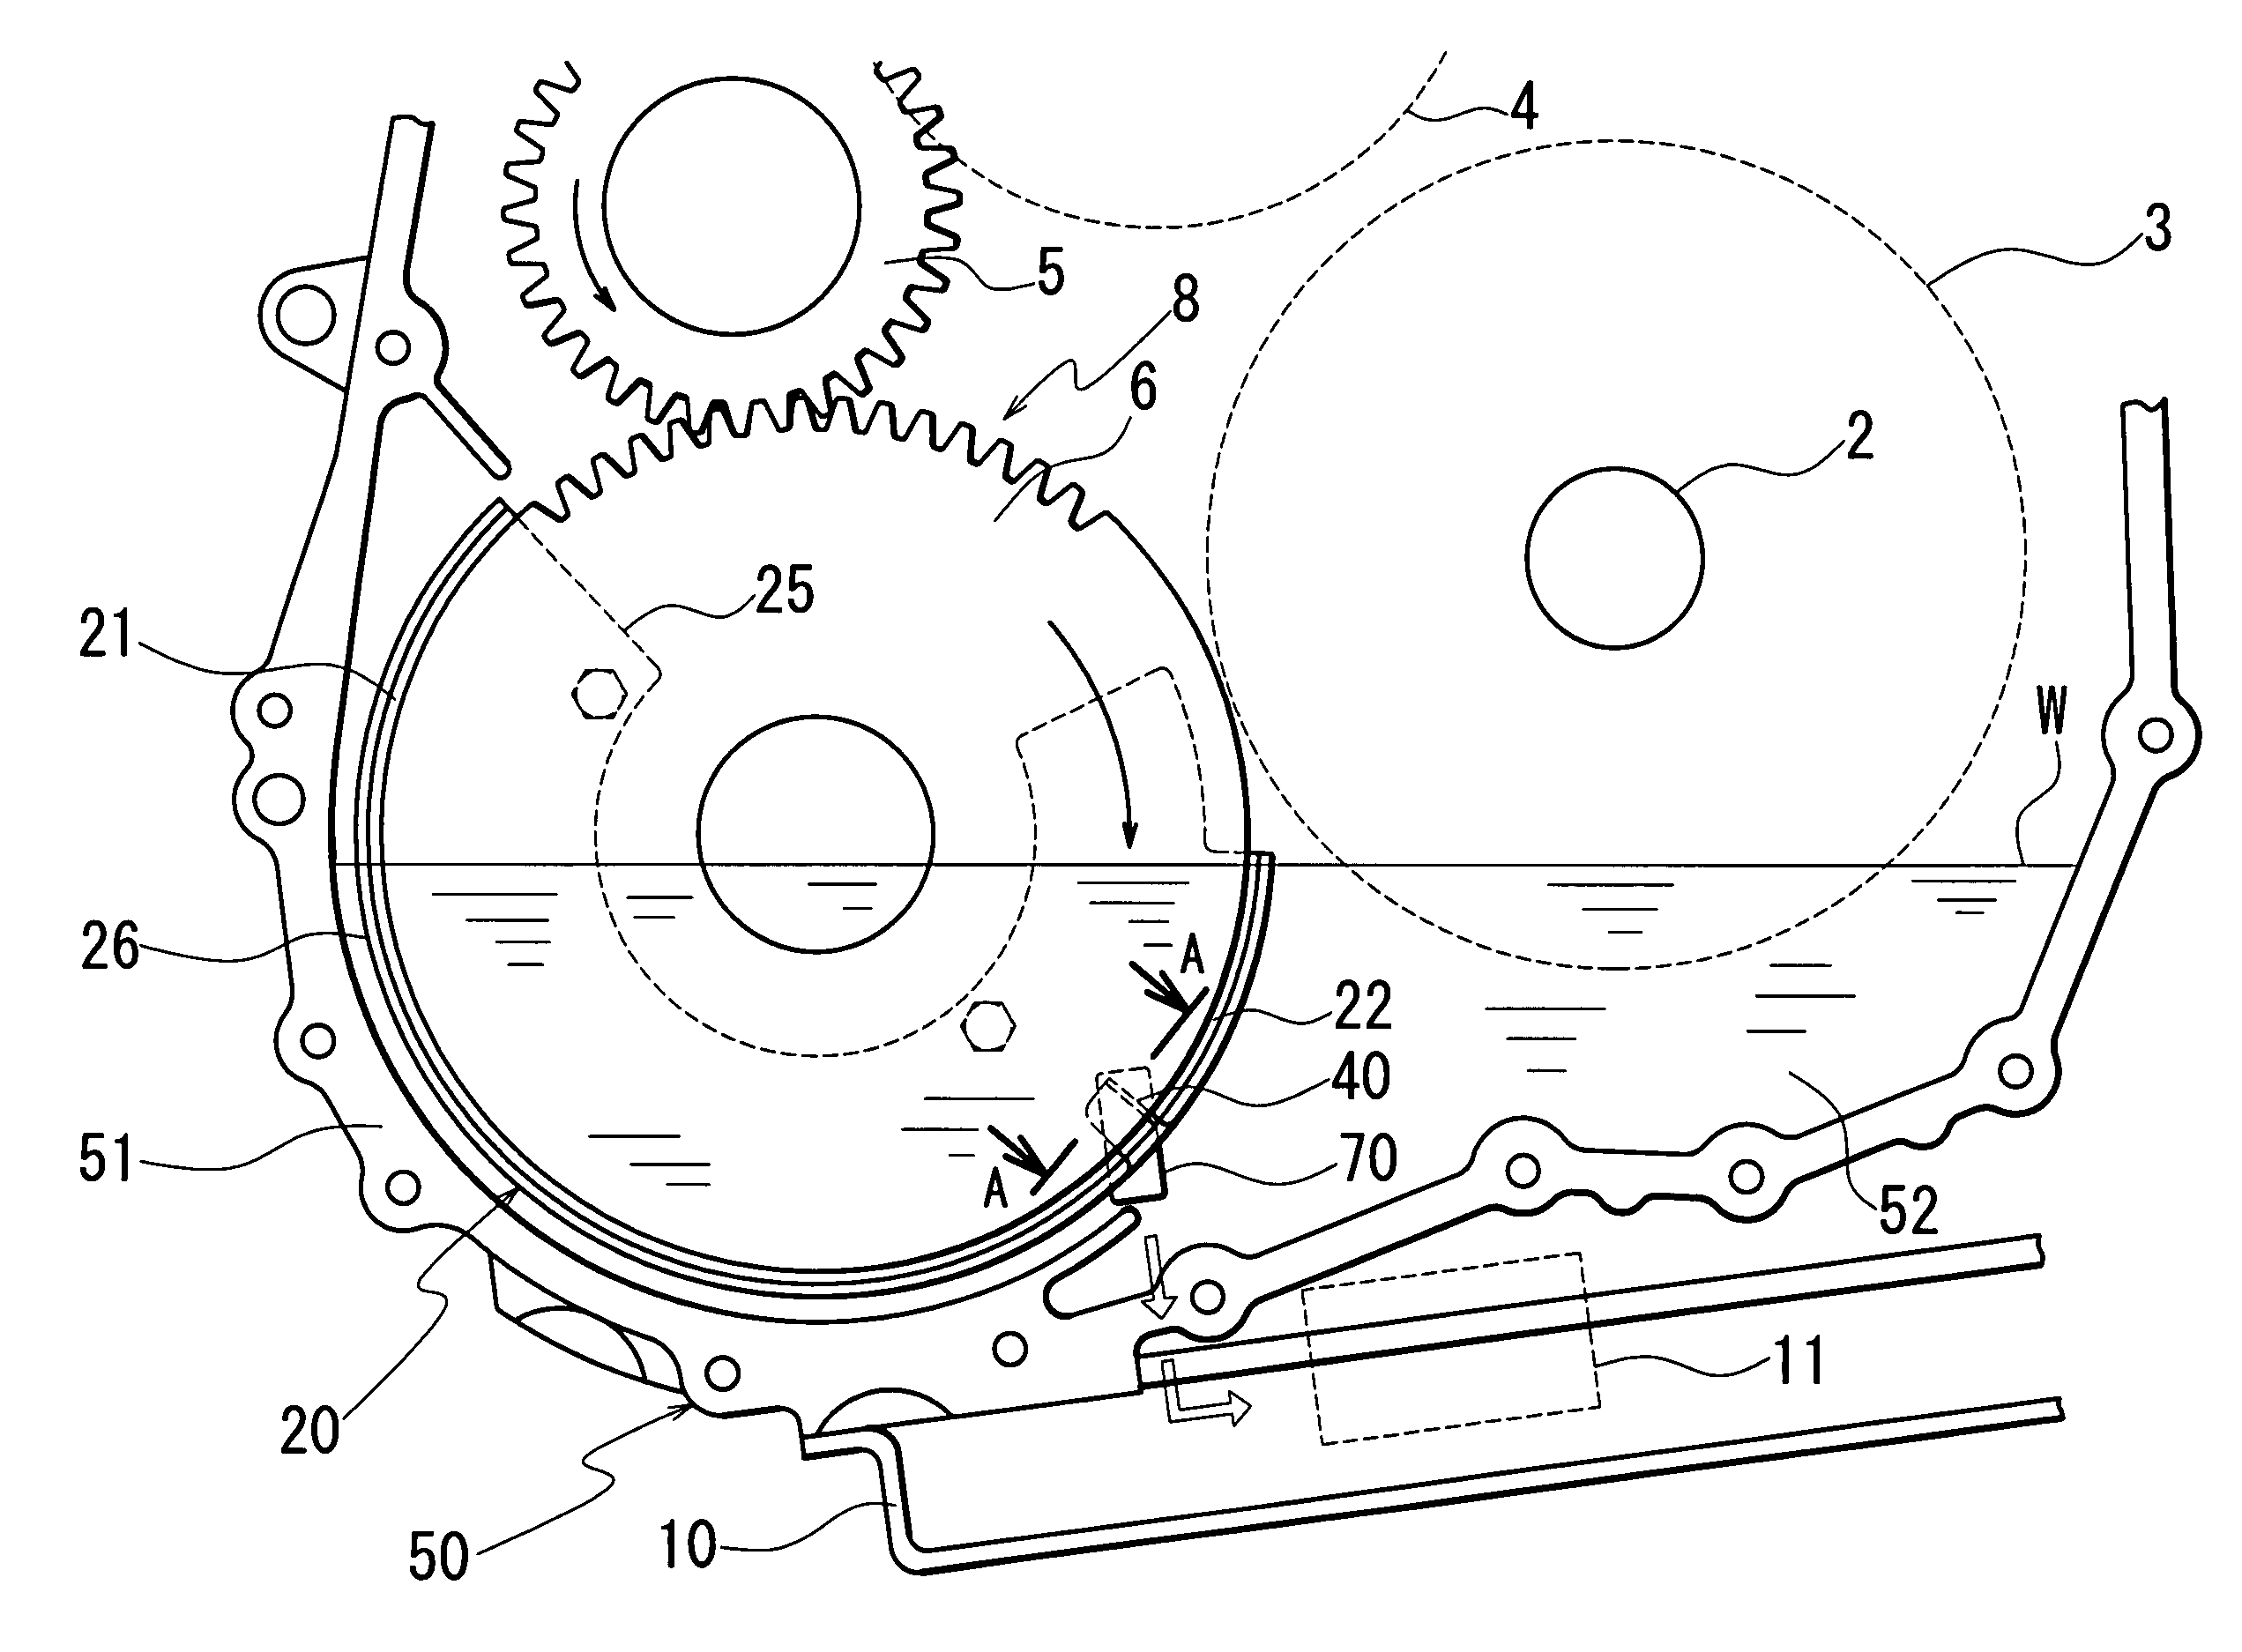 Oil discharge structure of baffle plate